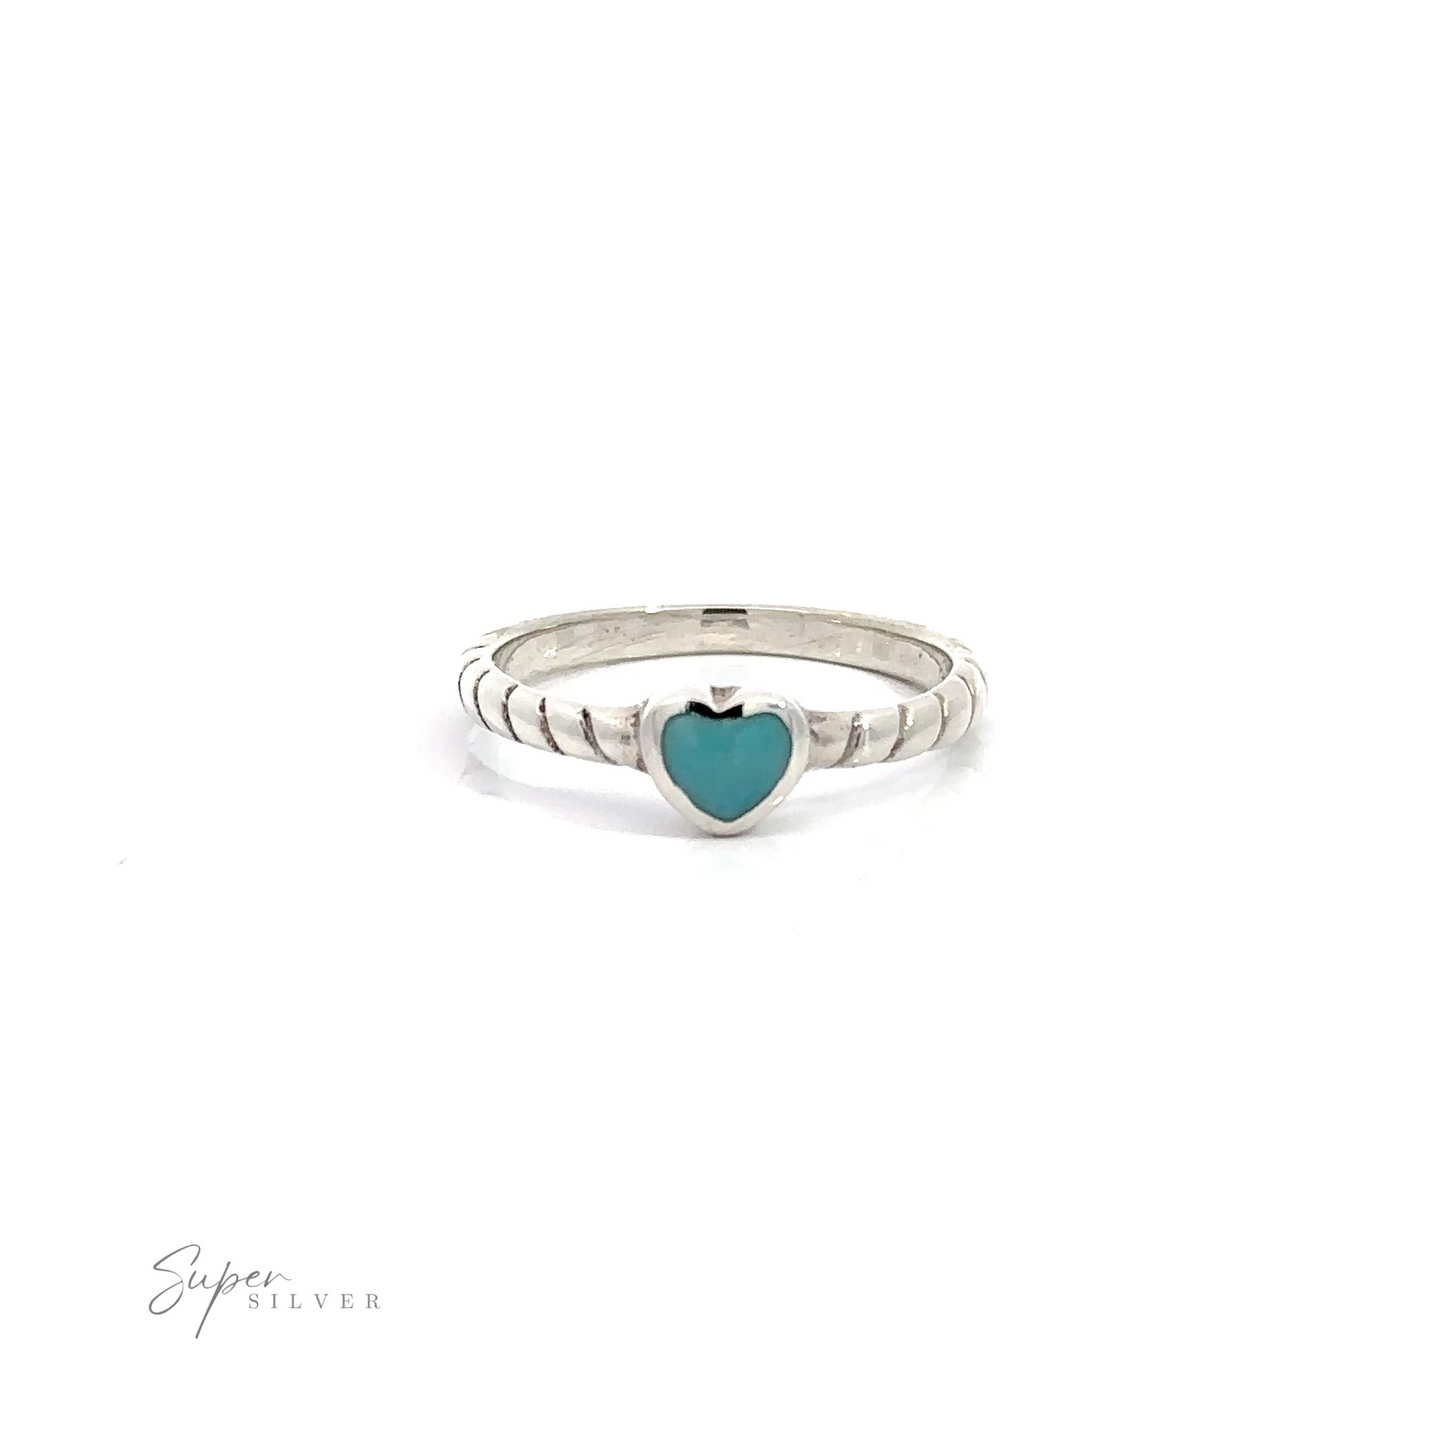 A small Turquoise Heart with Braided Band on a white background.